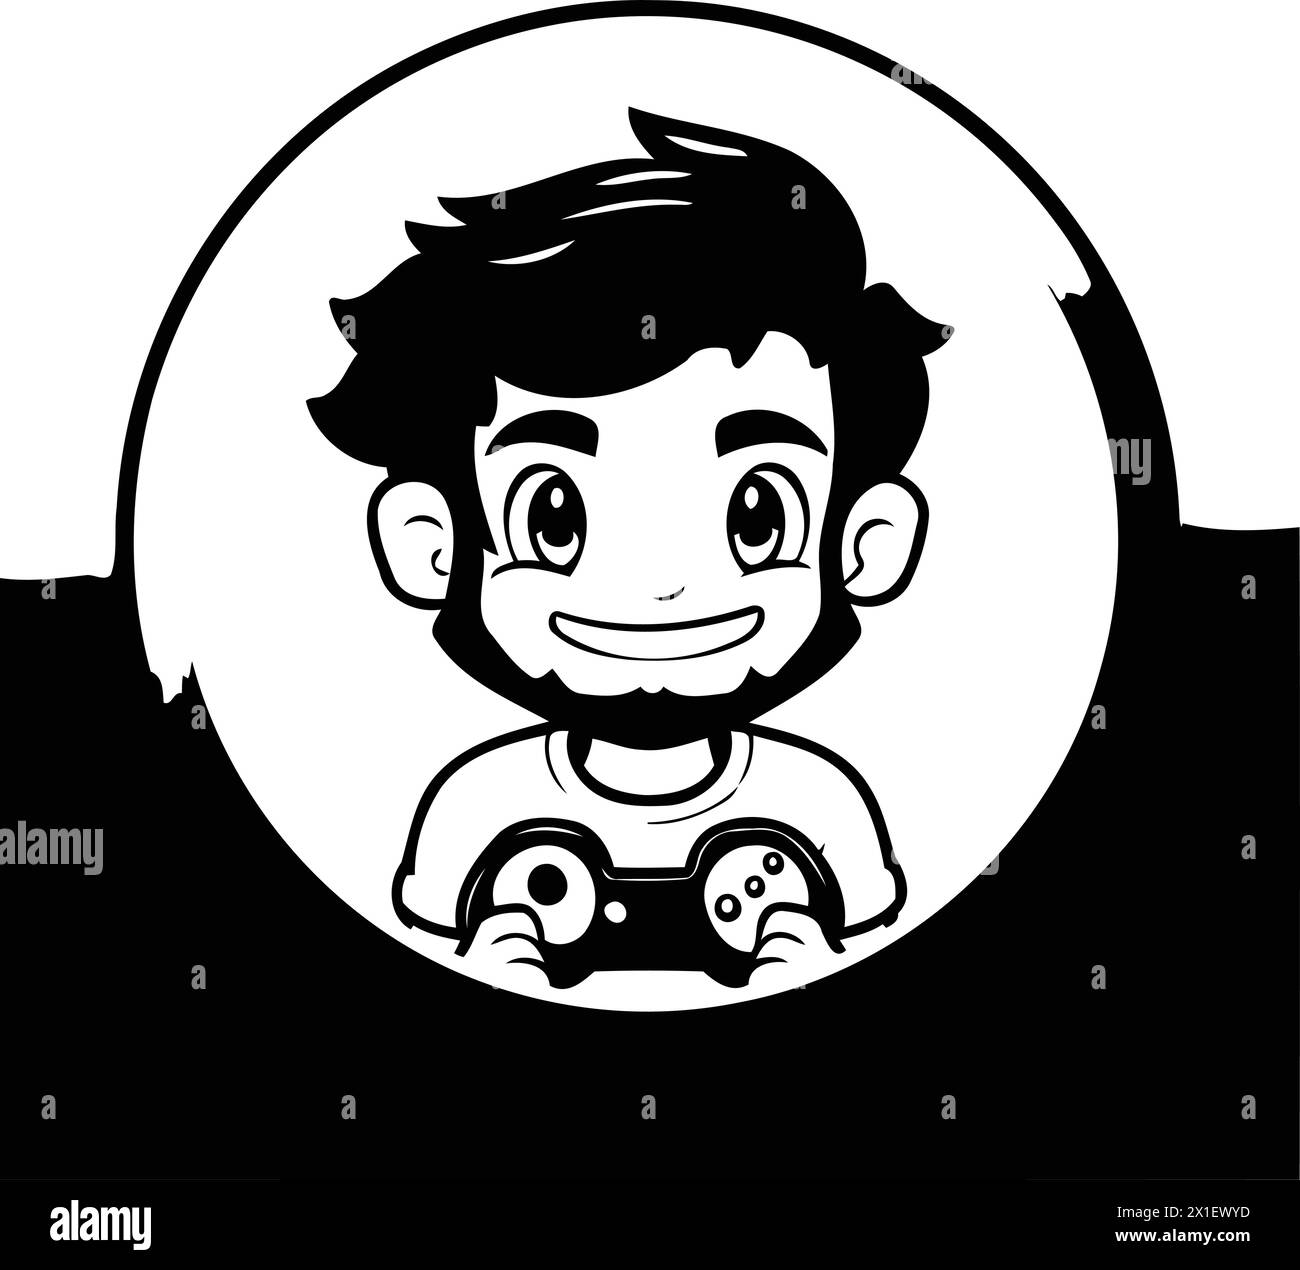 Boy playing video games with joystick in round frame illustration. Cartoon style. Stock Vector